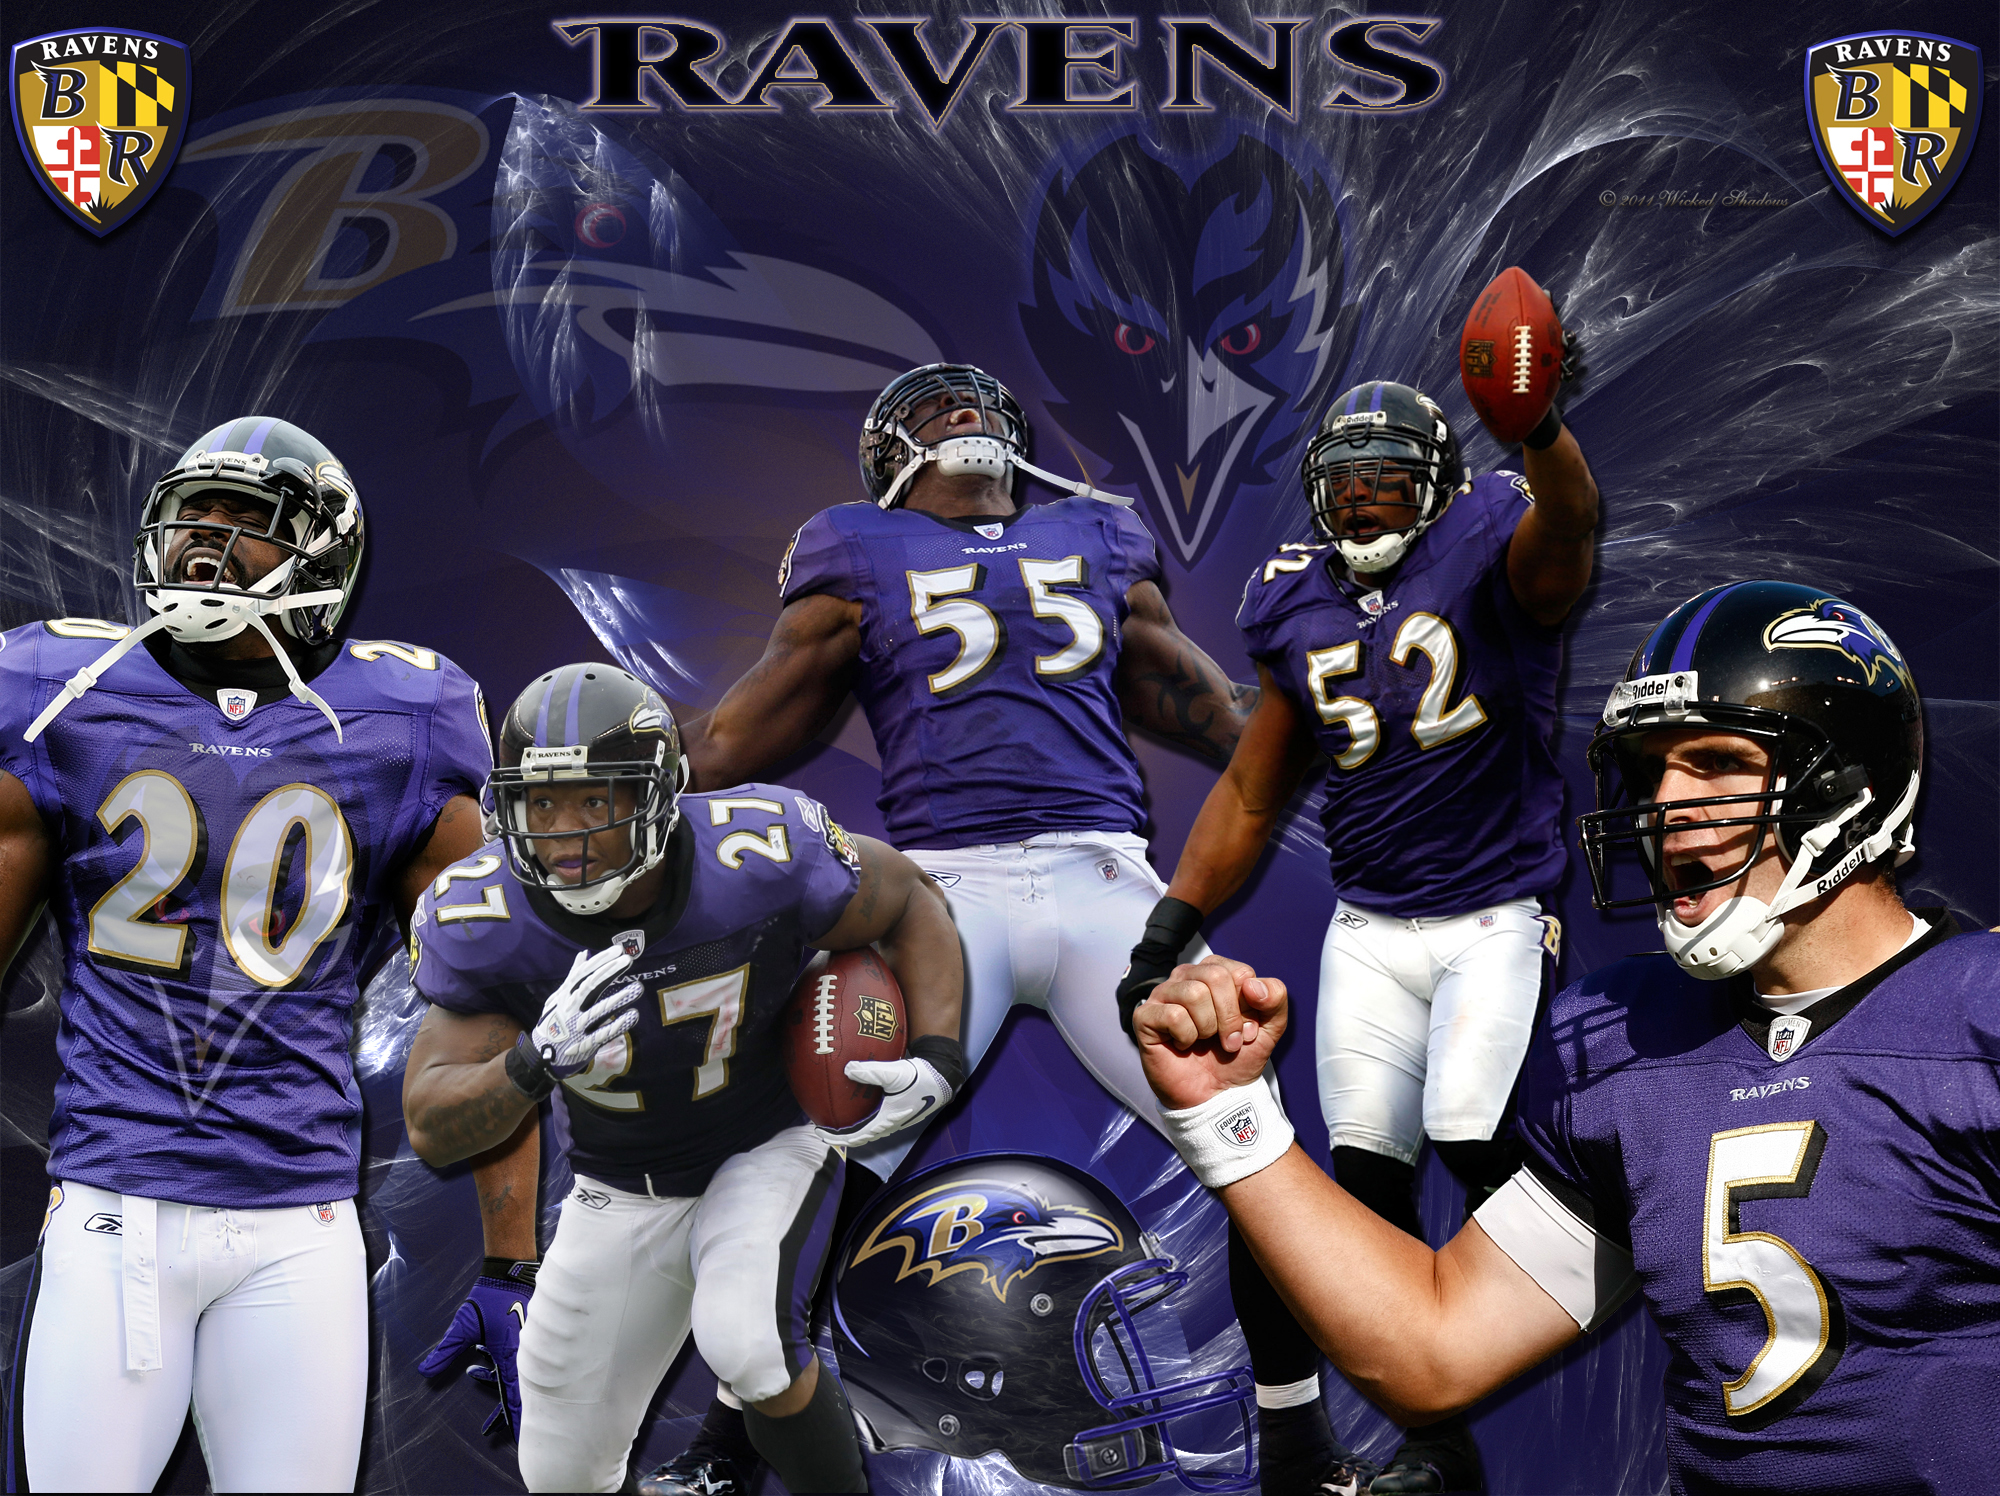 Hope You Like This Baltimore Ravens Wallpaper HD Background As Much